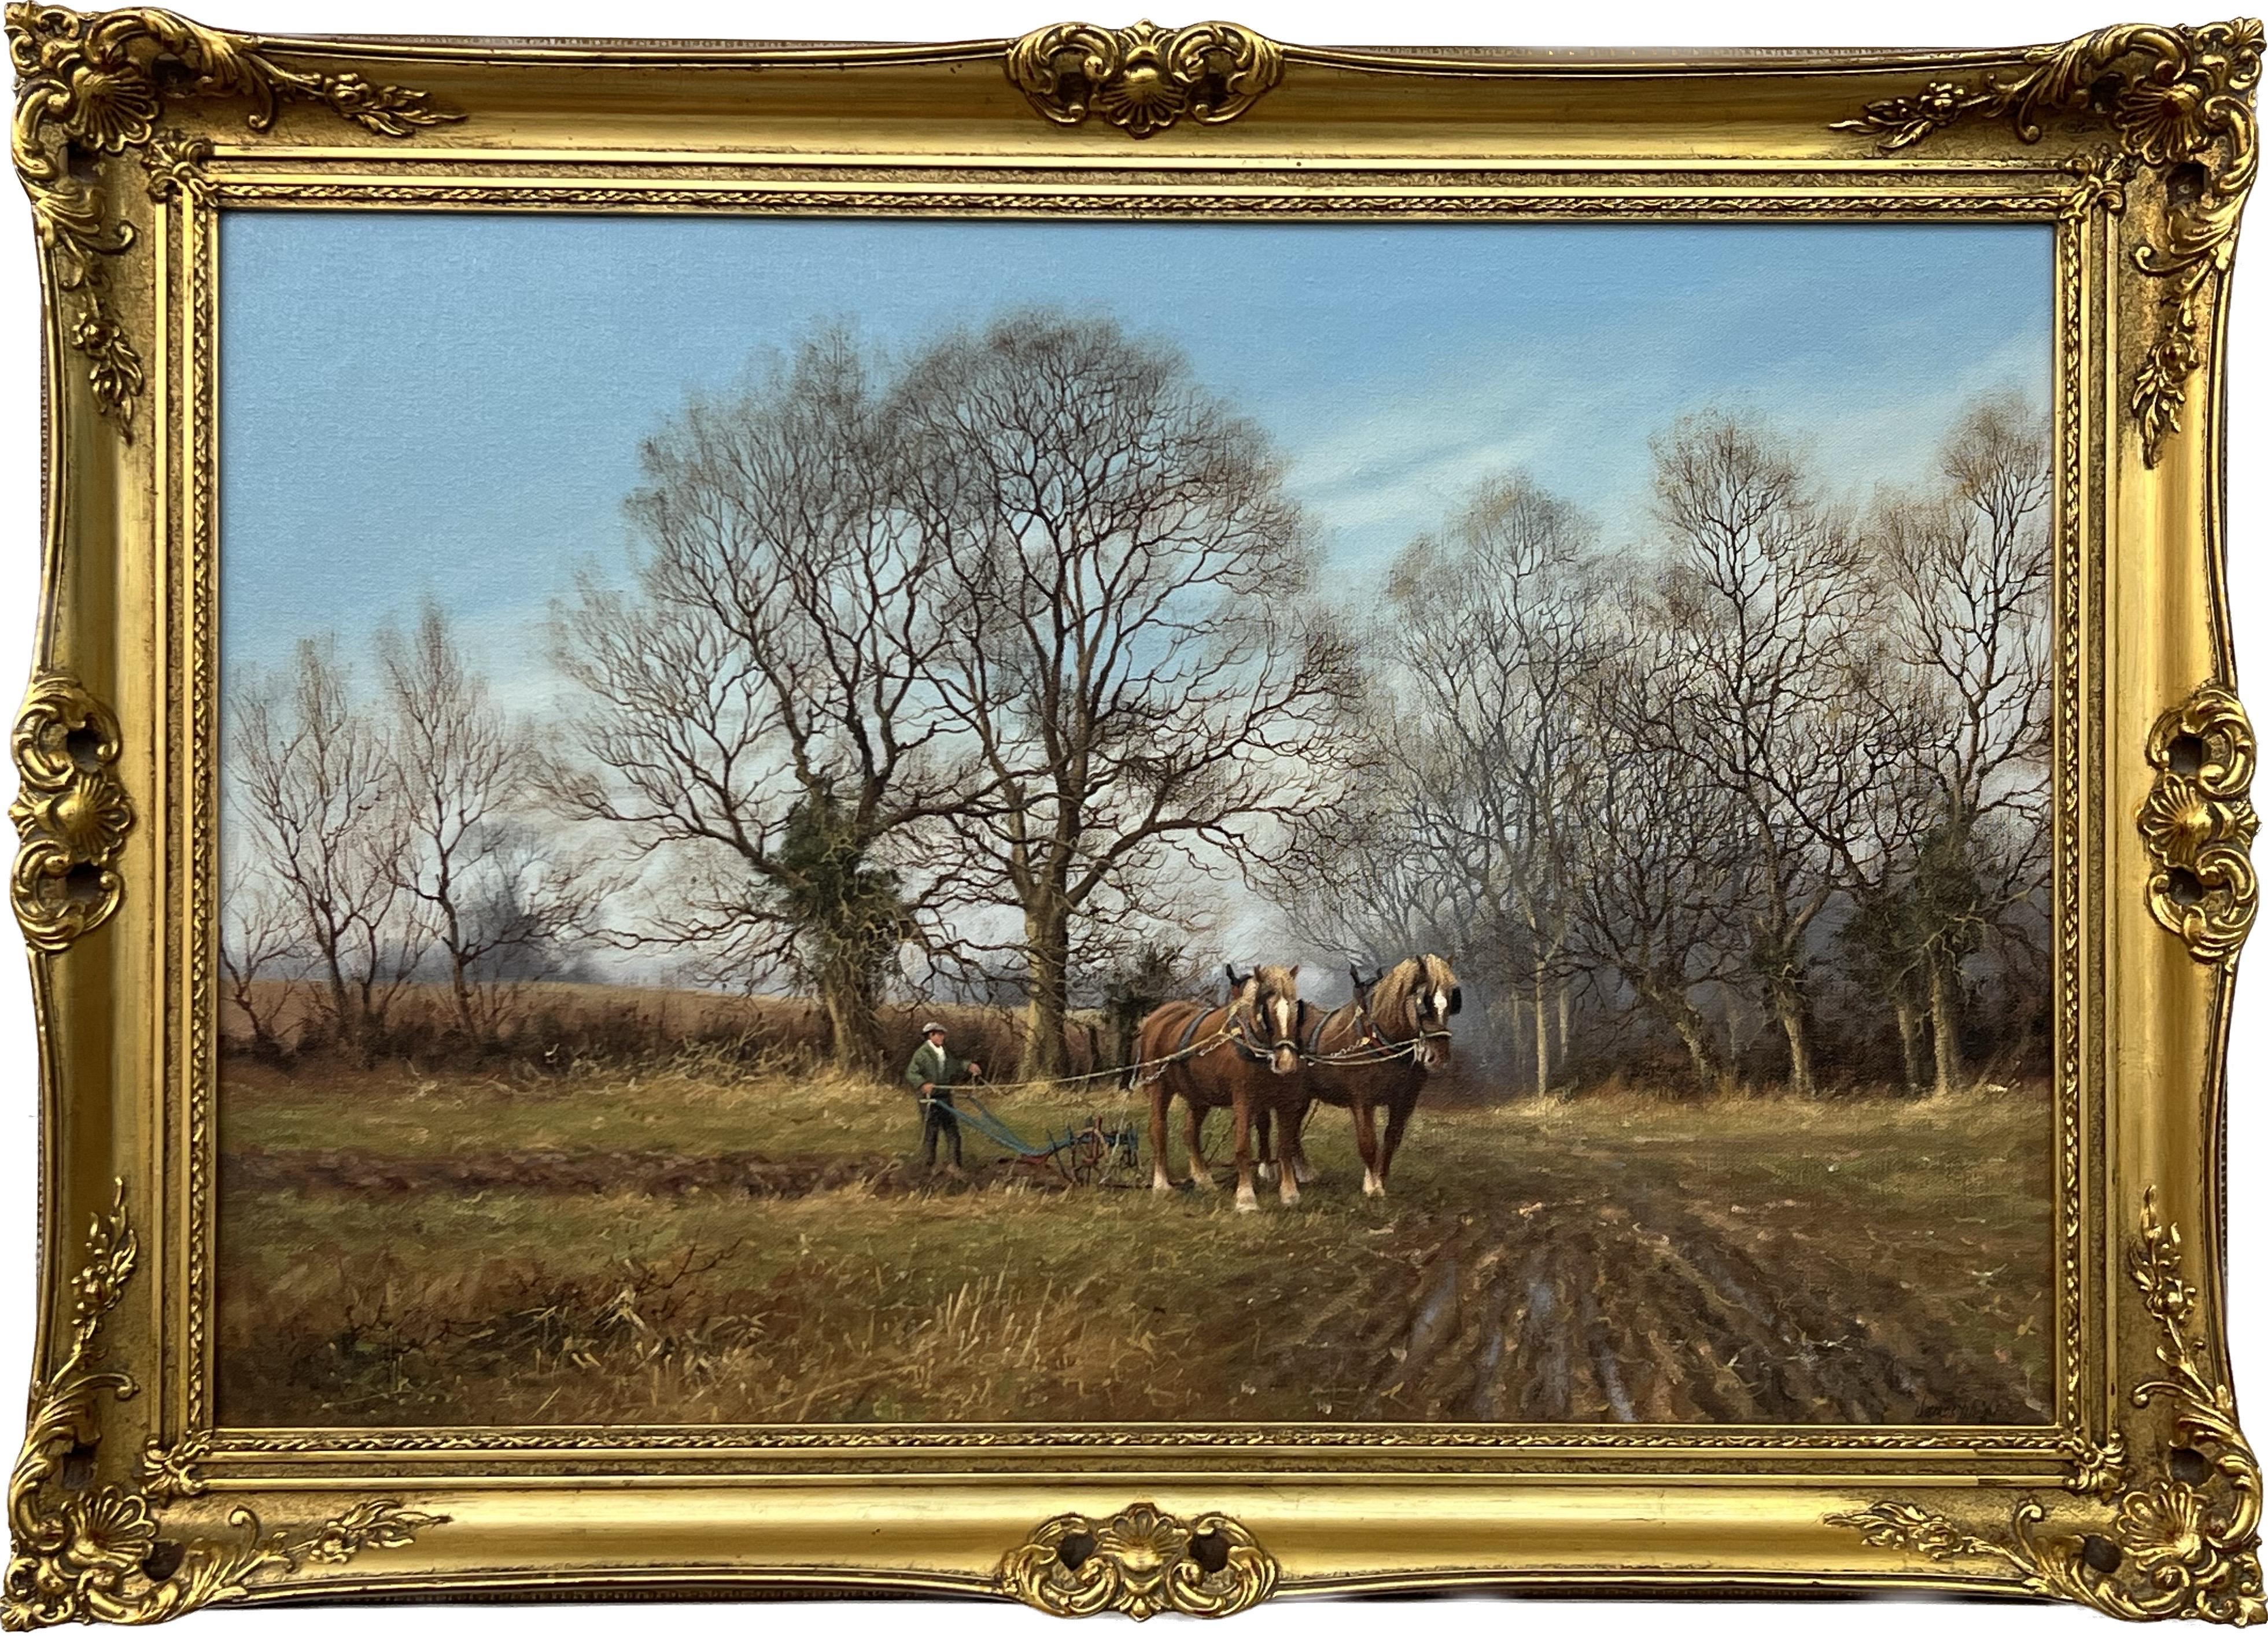 English Countryside & Trees with Horses Pulling Plough by Vintage British Artist